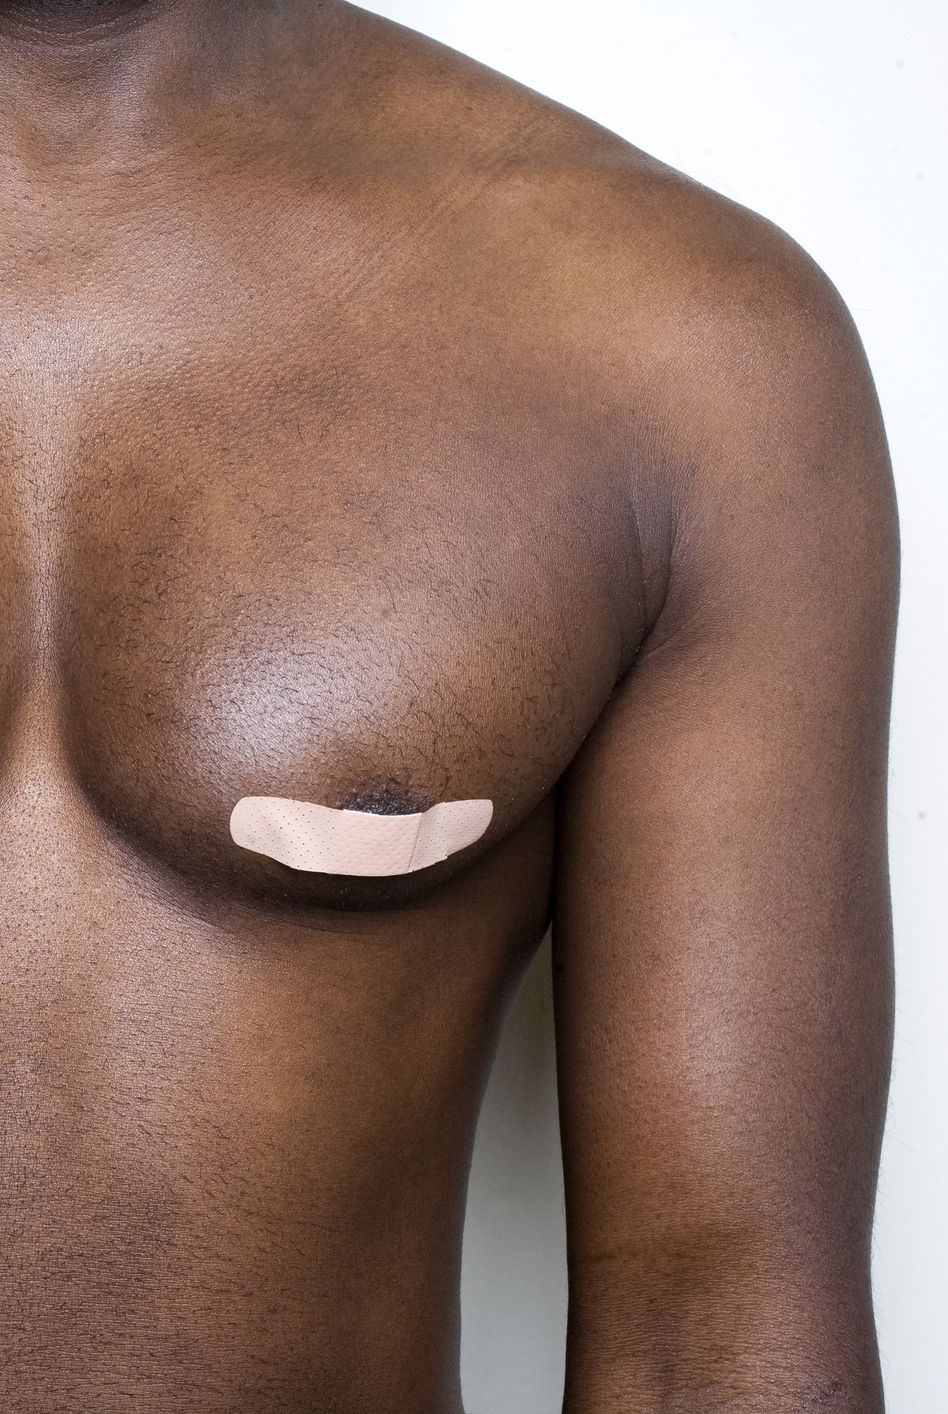 man with bandages on nipples for protection while marathon running